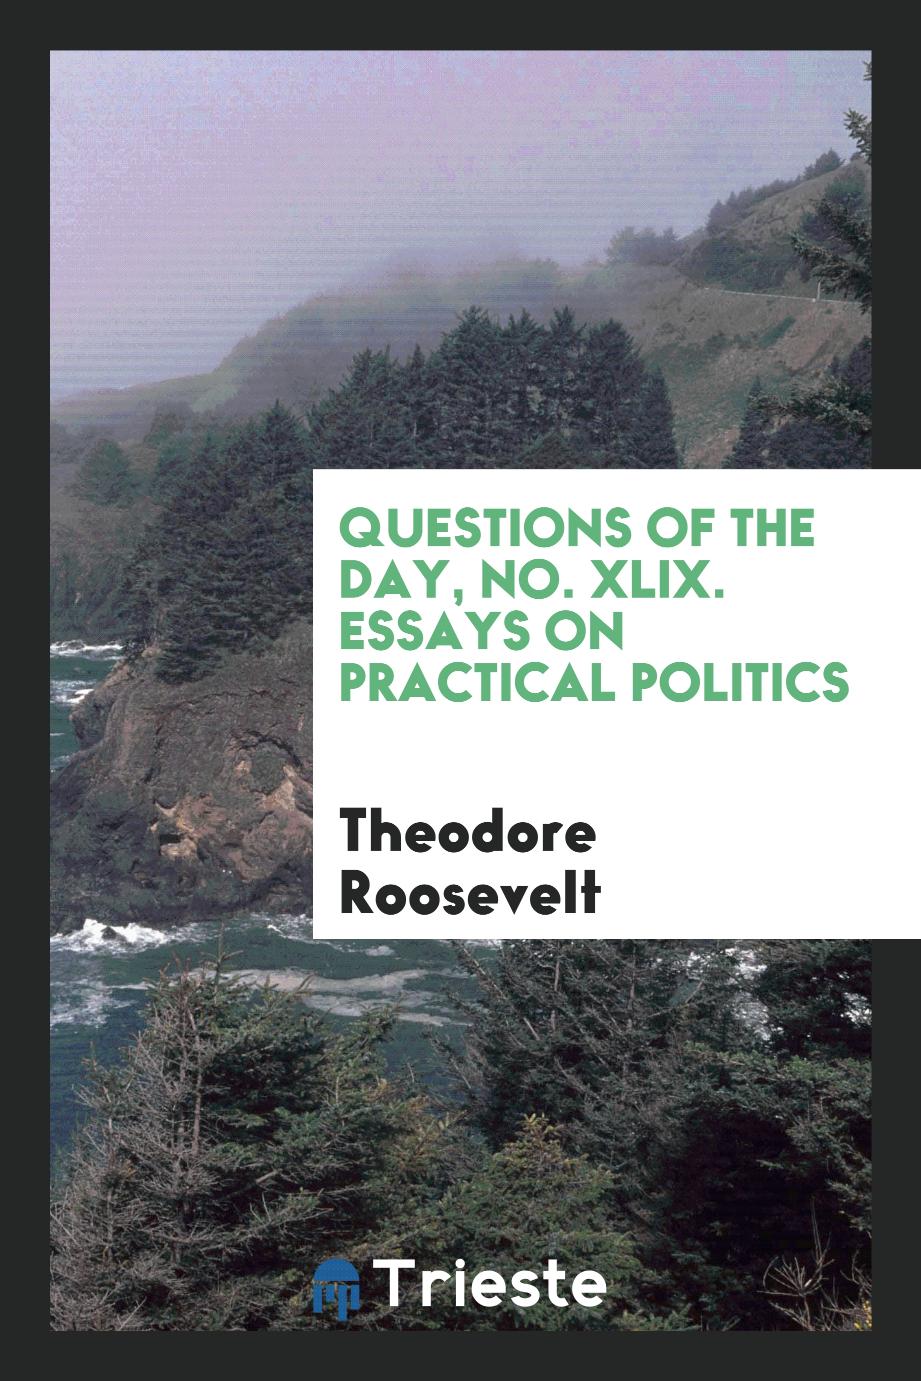 Questions of the day, No. XLIX. Essays on Practical Politics